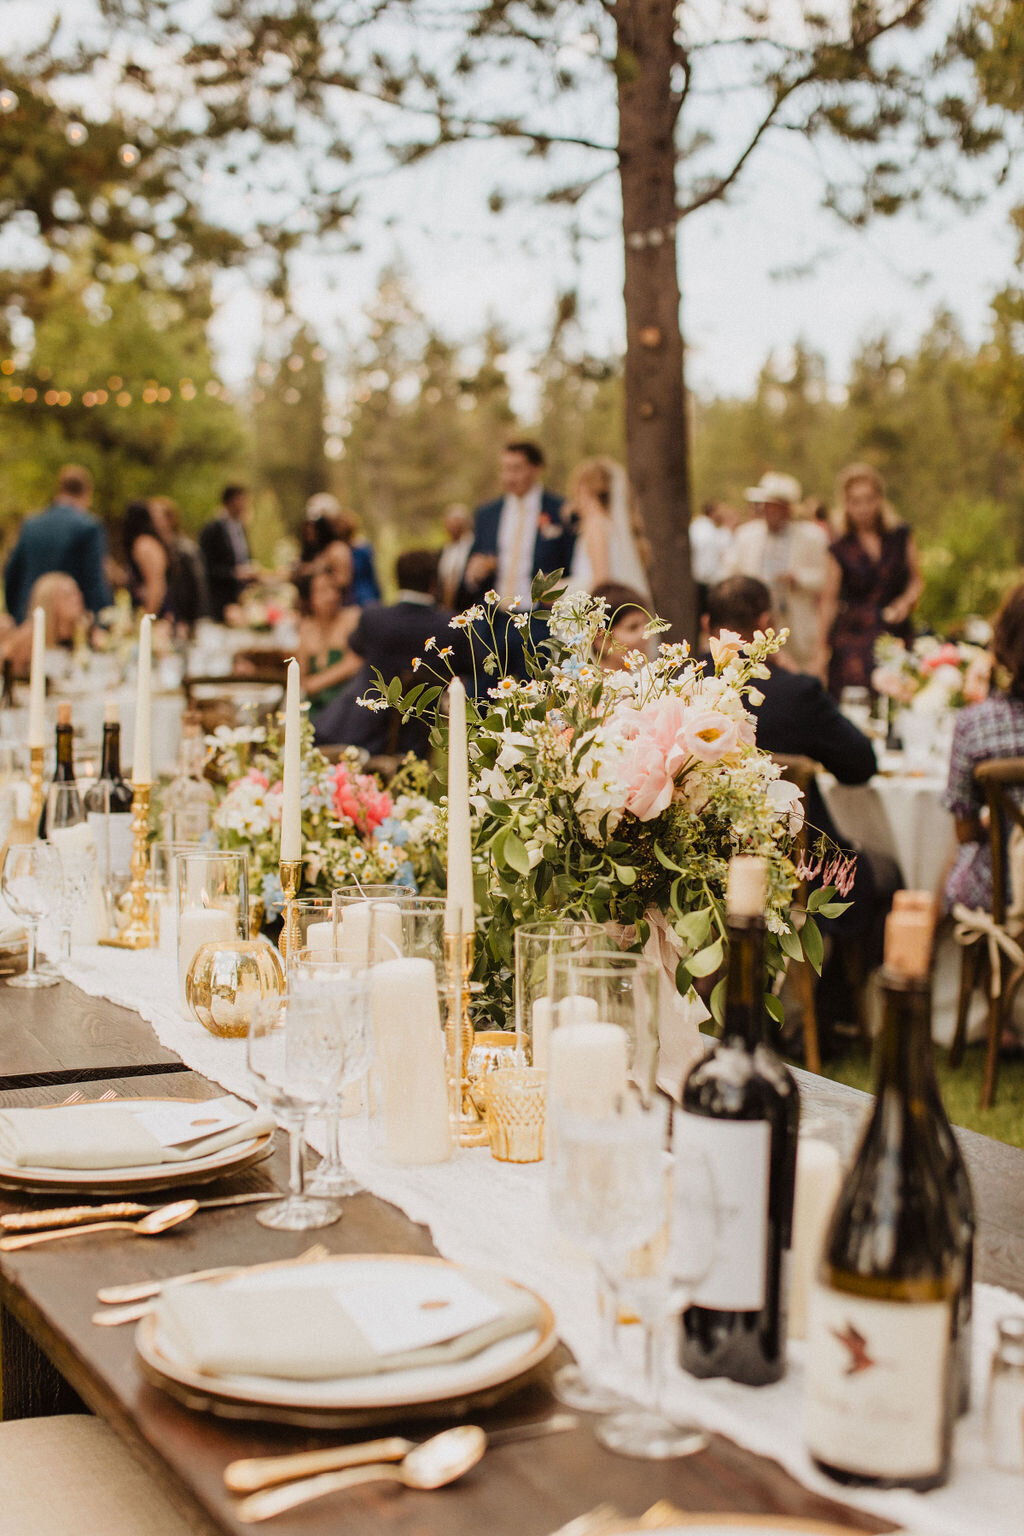 Head table with flowers, candles and wine bottles in Sunriver Oregon